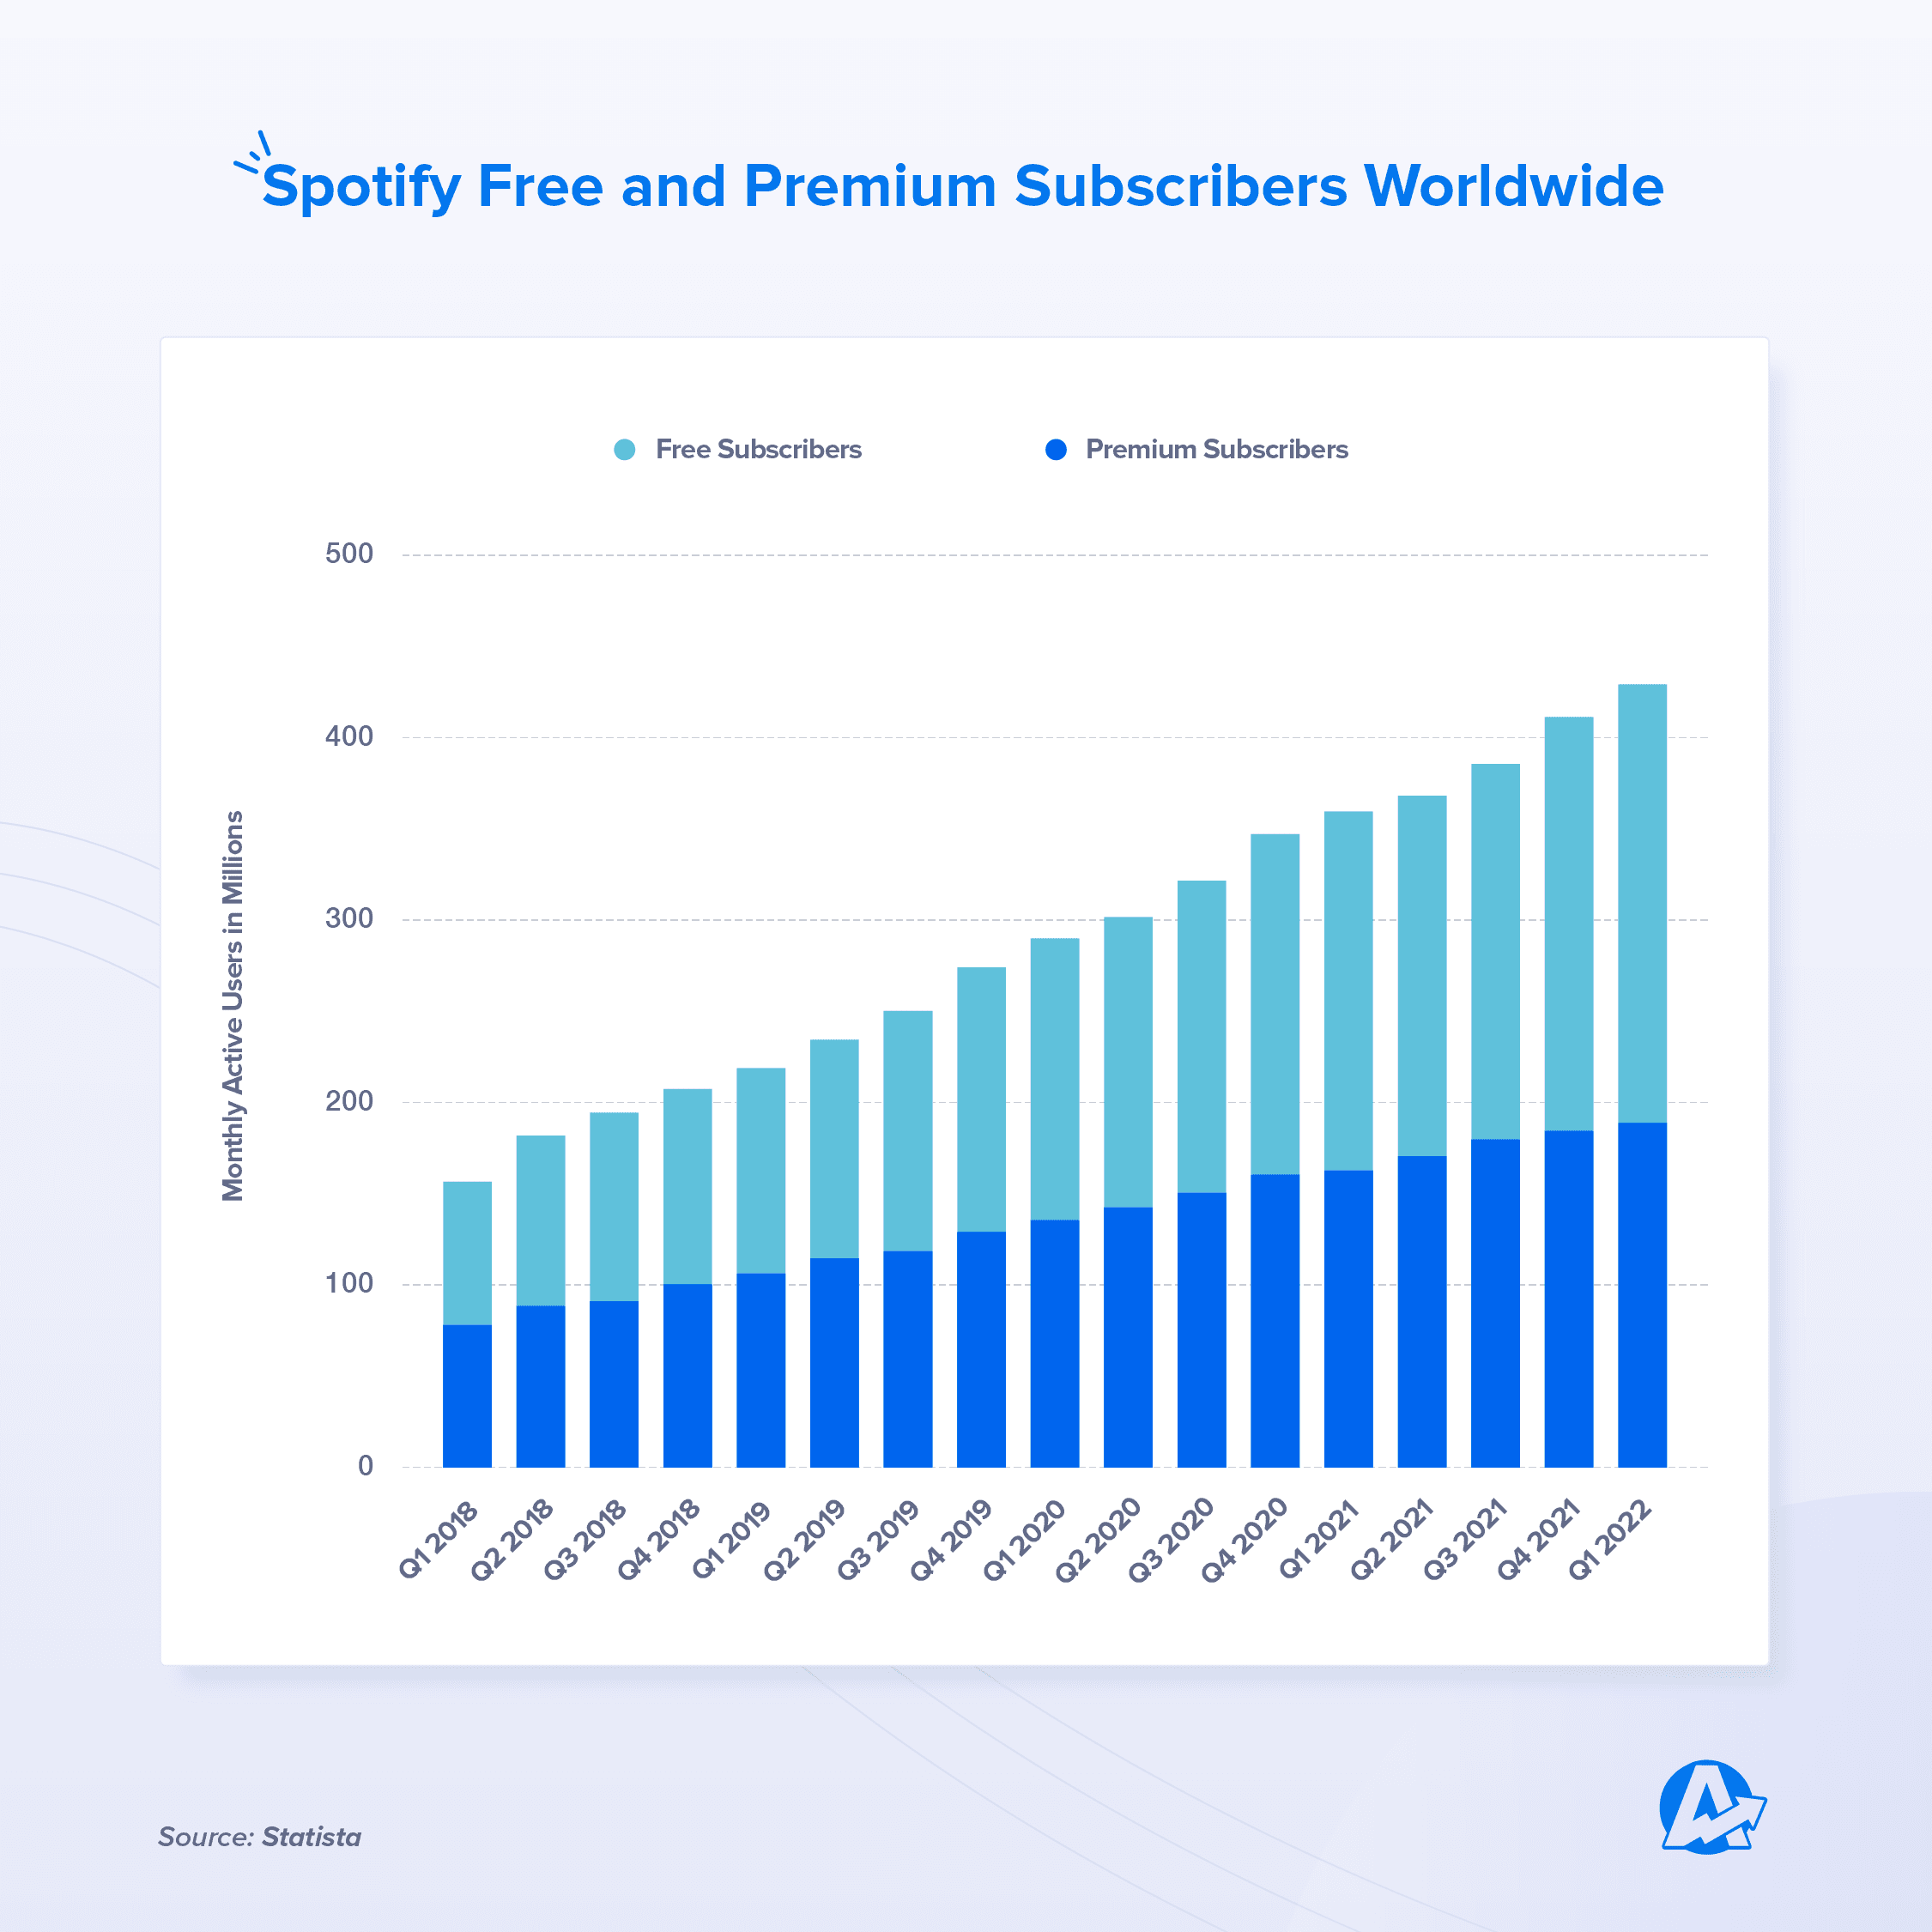 Spotify Free and Premium Subscribers Worldwide Graph 2018 to 2022